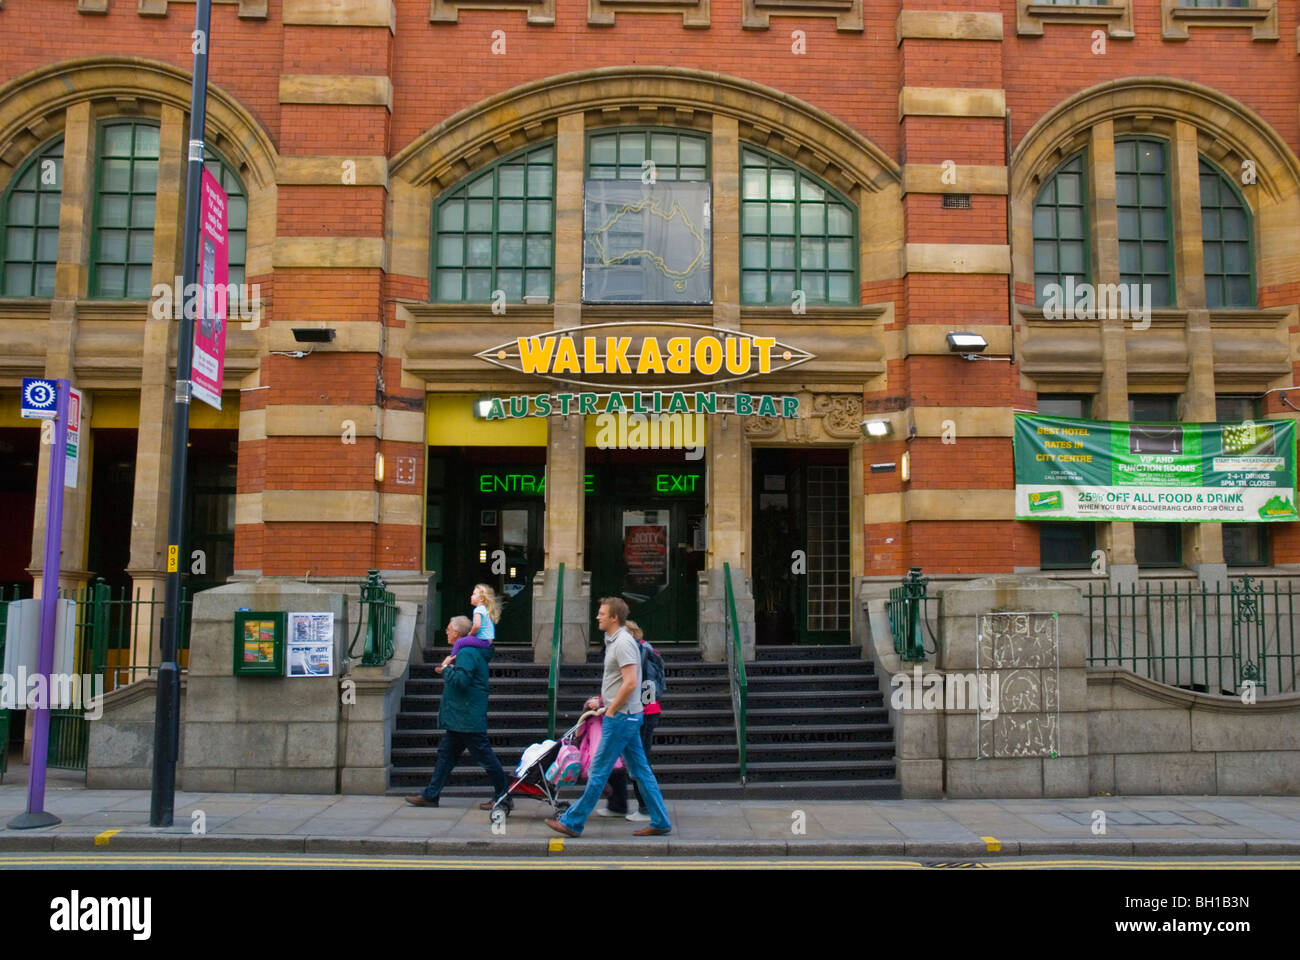 Walkabout the Australian bar chain in Britain in central Manchester England UK Europe Stock Photo